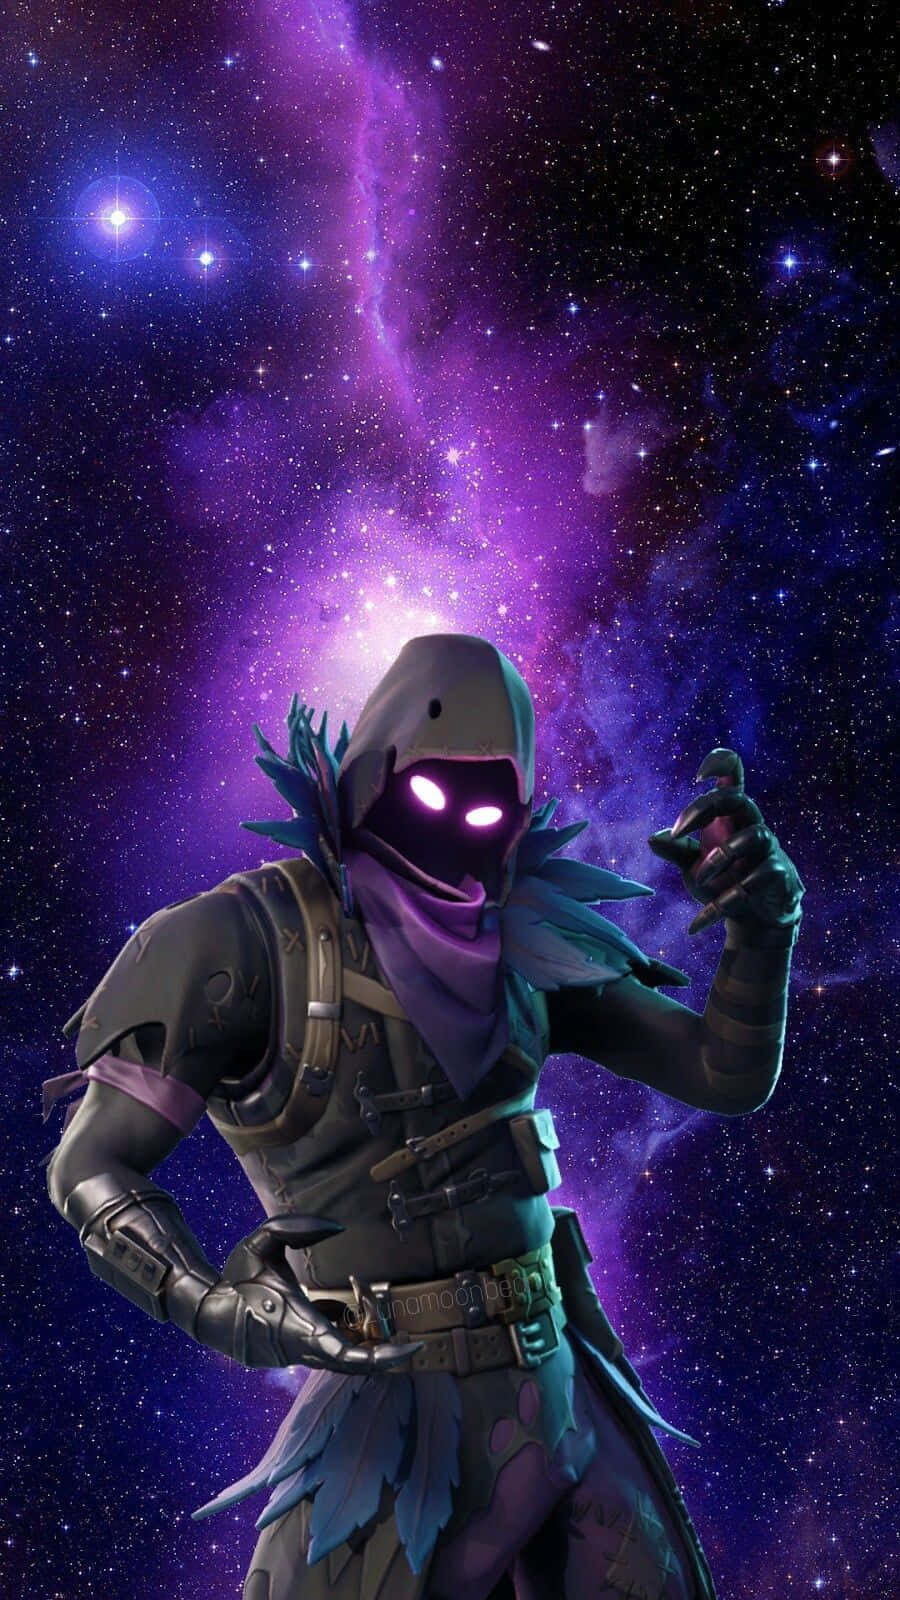 Play Raven in Fortnite for a fierce, intense and thrilling gaming experience. Wallpaper